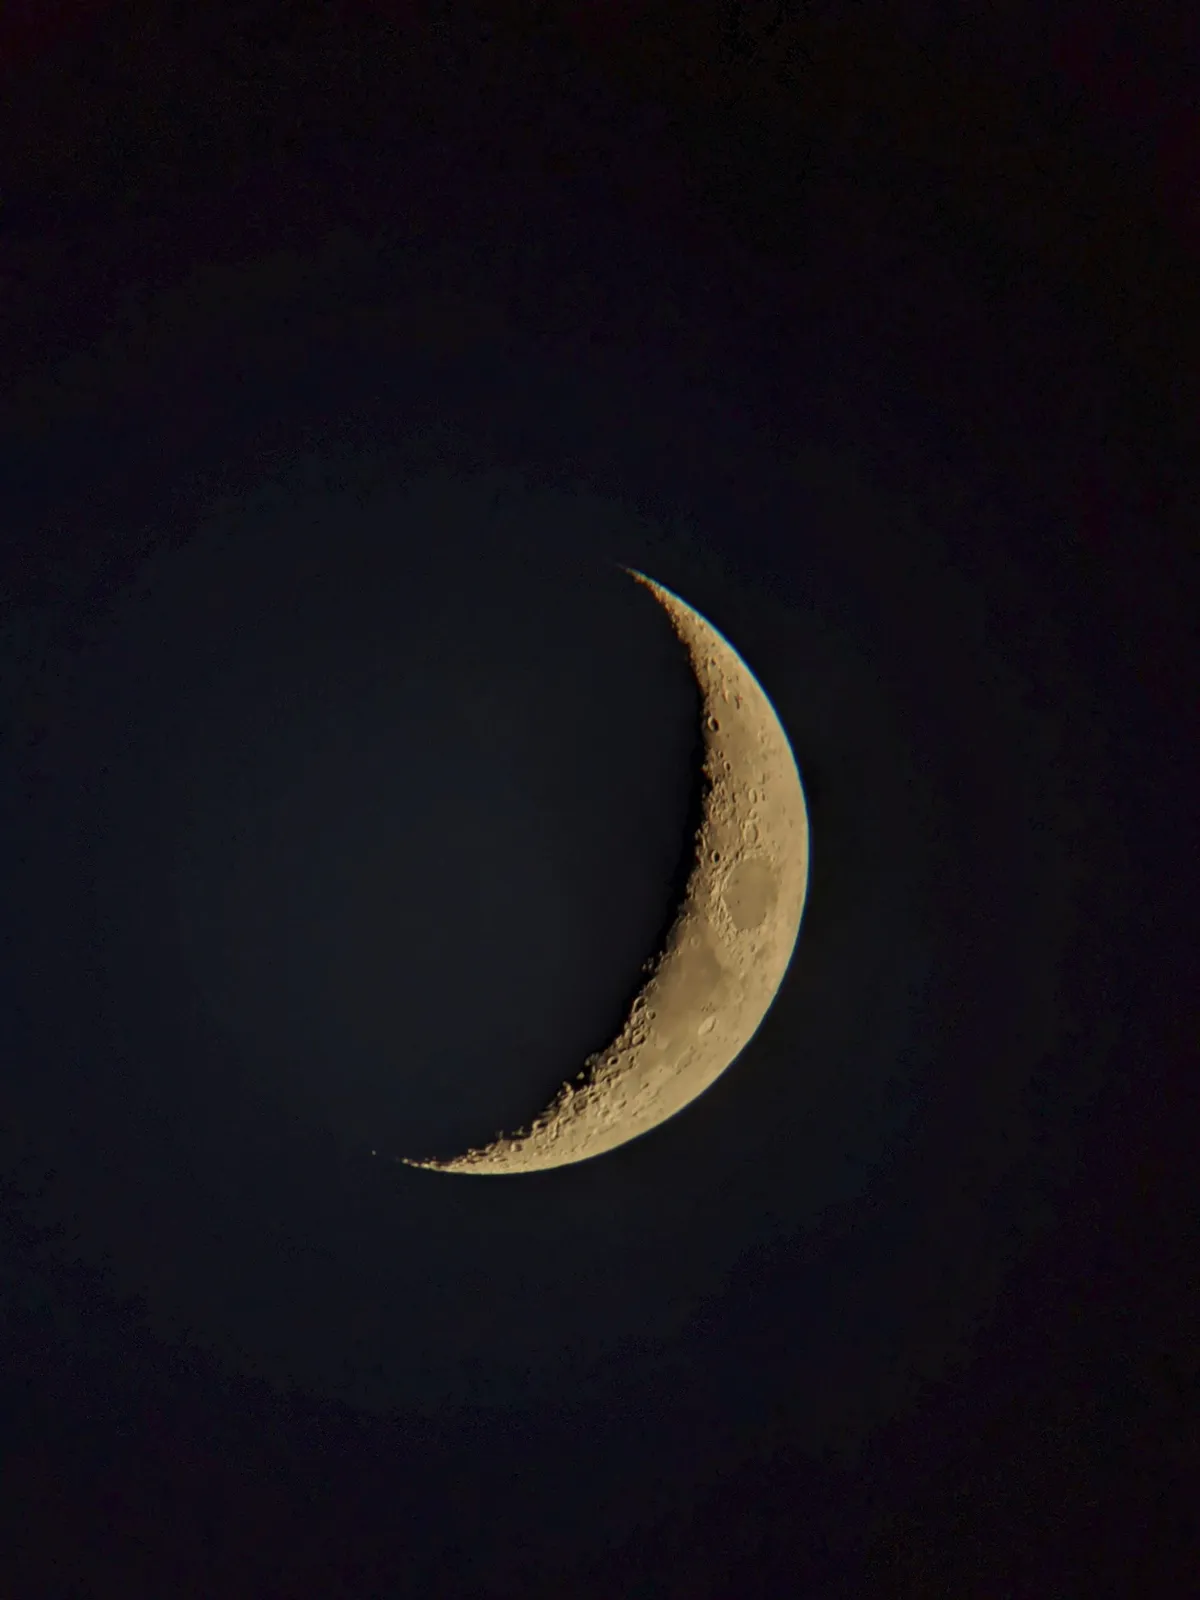 A crescent Moon captured with the Google Pixel 4. Credit: Paul Money